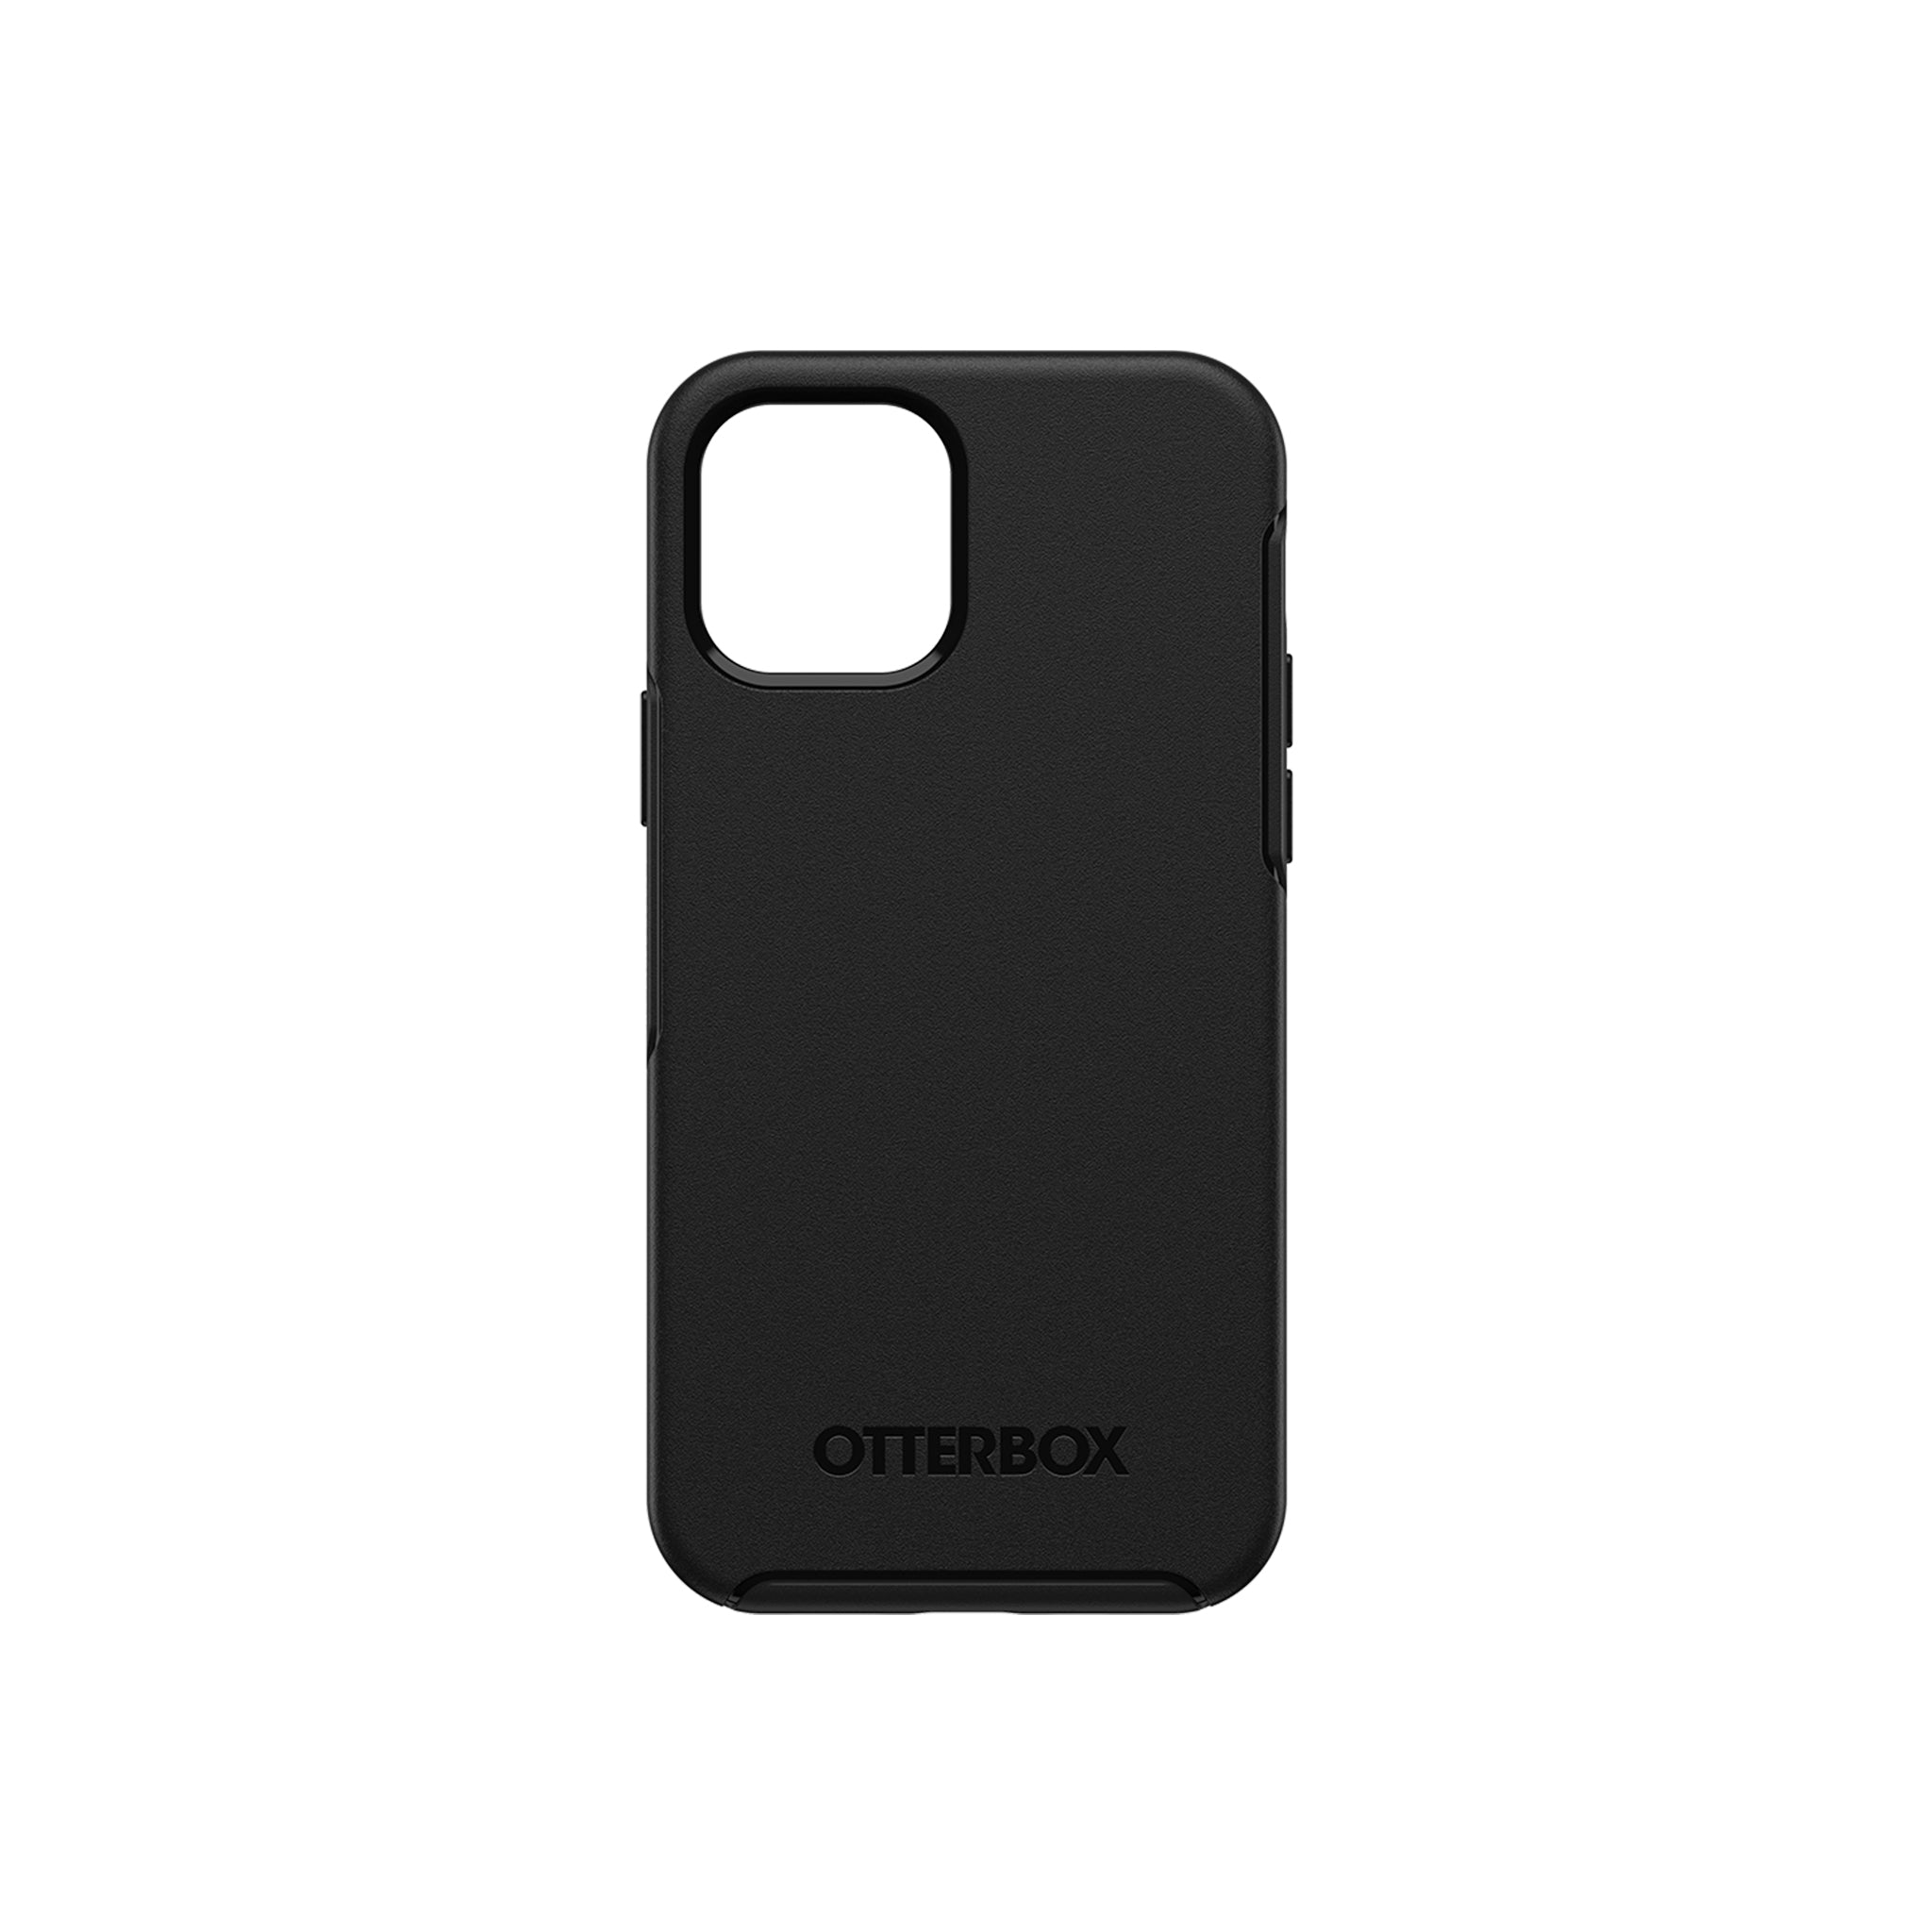 OtterBox - Symmetry for iPhone 12 / 12 Pro - Black